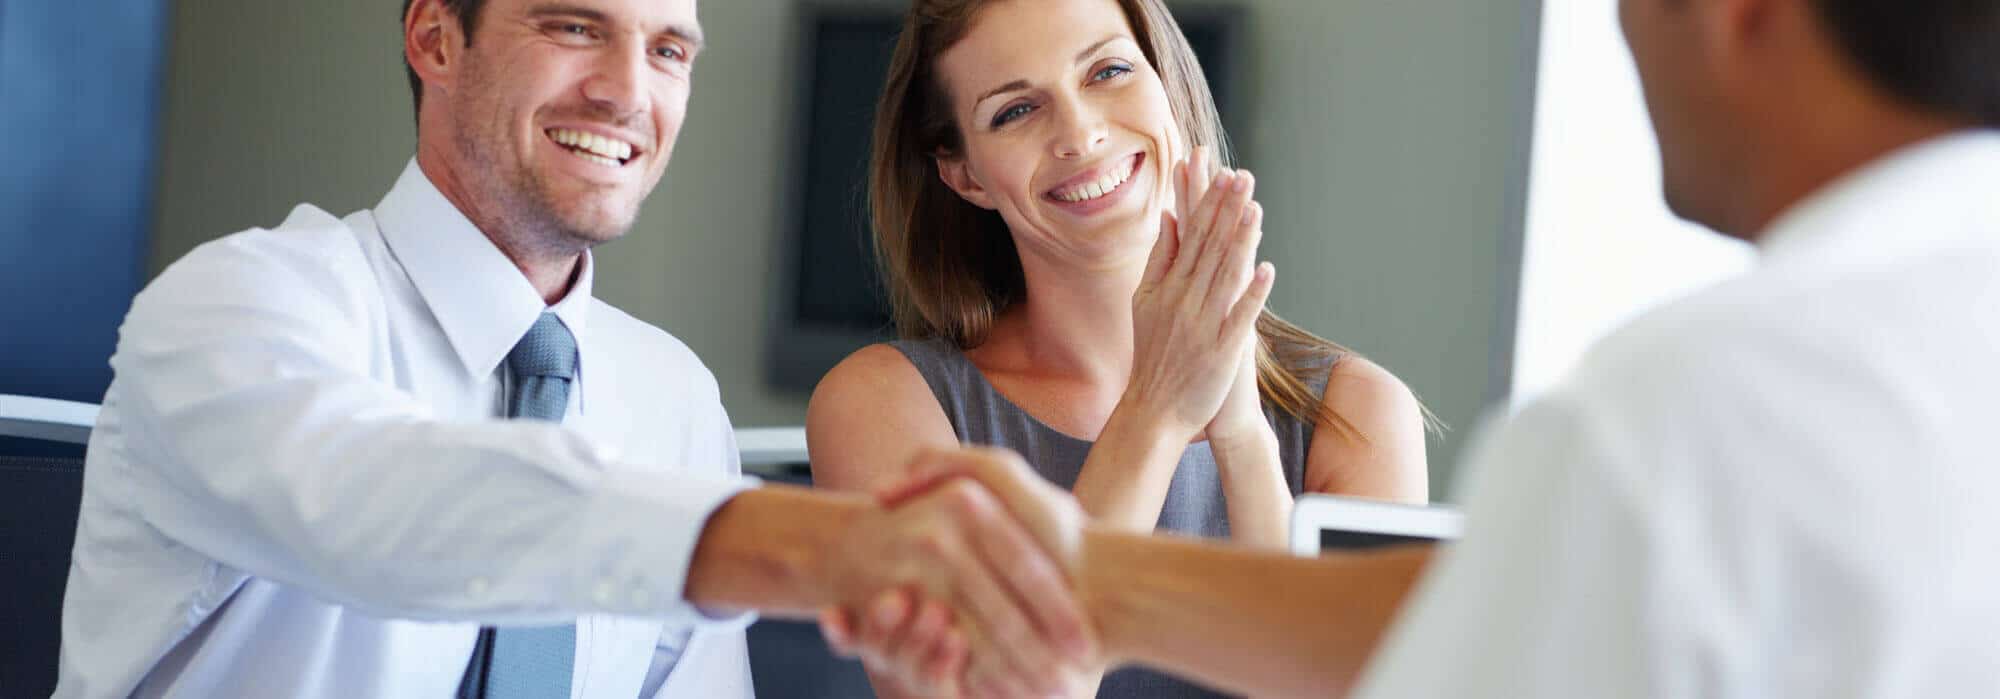 A man and woman sitting across from a business professional smiling and shaking hands